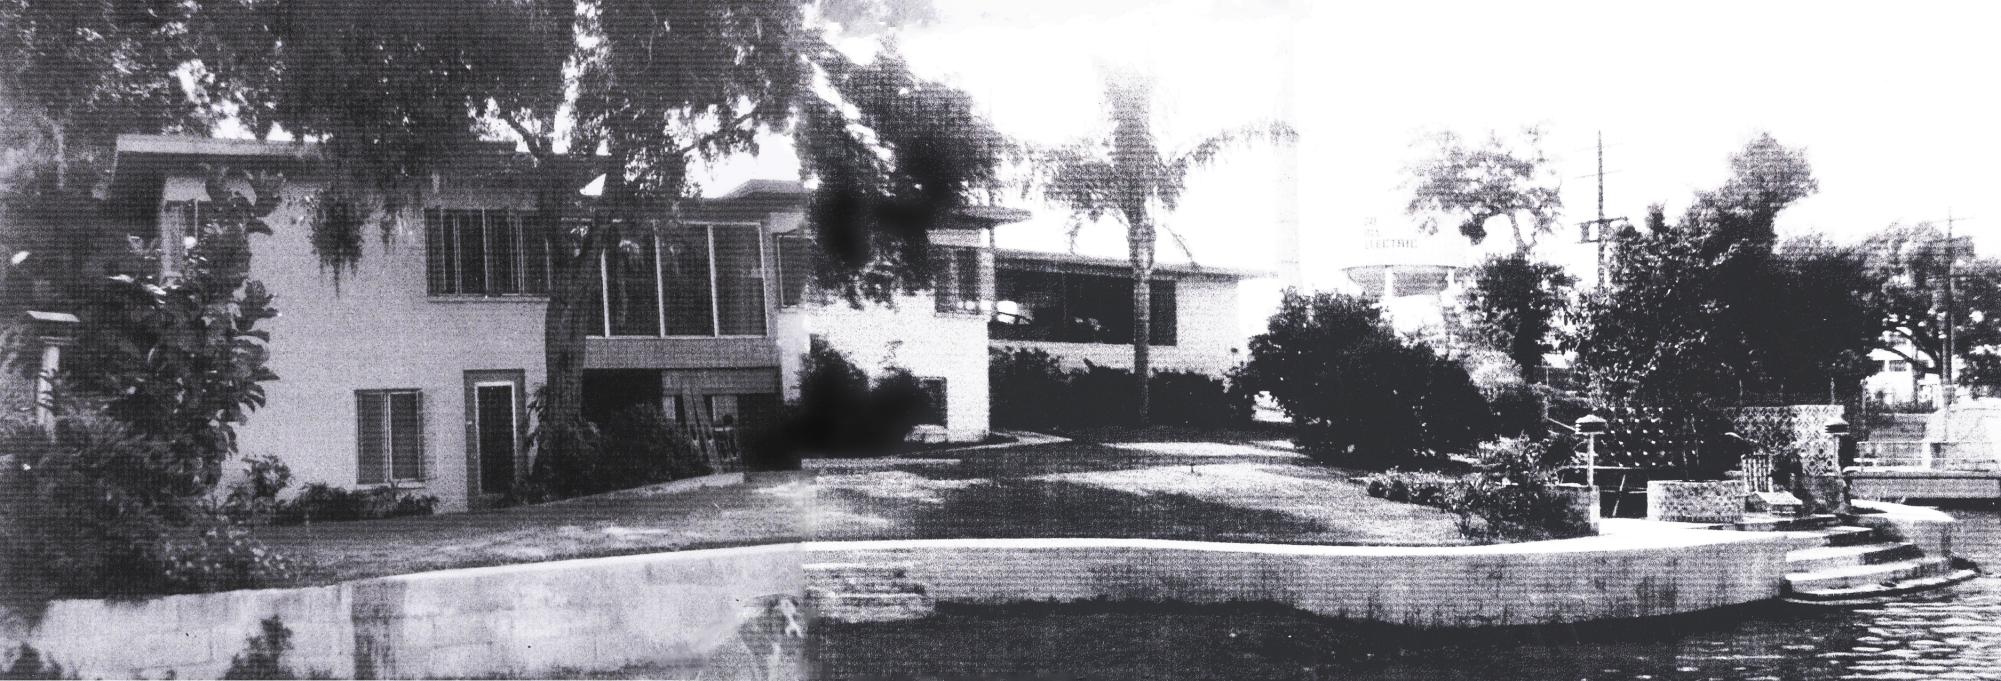 (Above) Right here on the LHPS campus, eerie feelings have emerged when students and staff have walked alone in Highland House, where students come to attend classes in the traditional and digital arts. Highland House was originally a family home, built in the late 1940s or early 1950s. After Orlando Junior College purchased the land, it was used as offices but, “Retained a ‘house’ layout,” states Dr. Brenda Walton. She also said that by the 1970s, the land became a part of Lake Highland with various purposes, including hosting home economics, science, and yearbook classes as well as a space for faculty to host holiday parties. By the 2000s, it became the arts building. However, with a long history comes troublesome events, including the deaths of many people around the property. Ms. Ginger Bryant, states that although she doesn’t believe in ghosts, she has, “Seen things in that building that [she is] not able to explain with any sort of scientific backing.” Other administrators and students have relayed similar sentiments, stating that they feel some sort of presence or negative energy when passing by the building. 